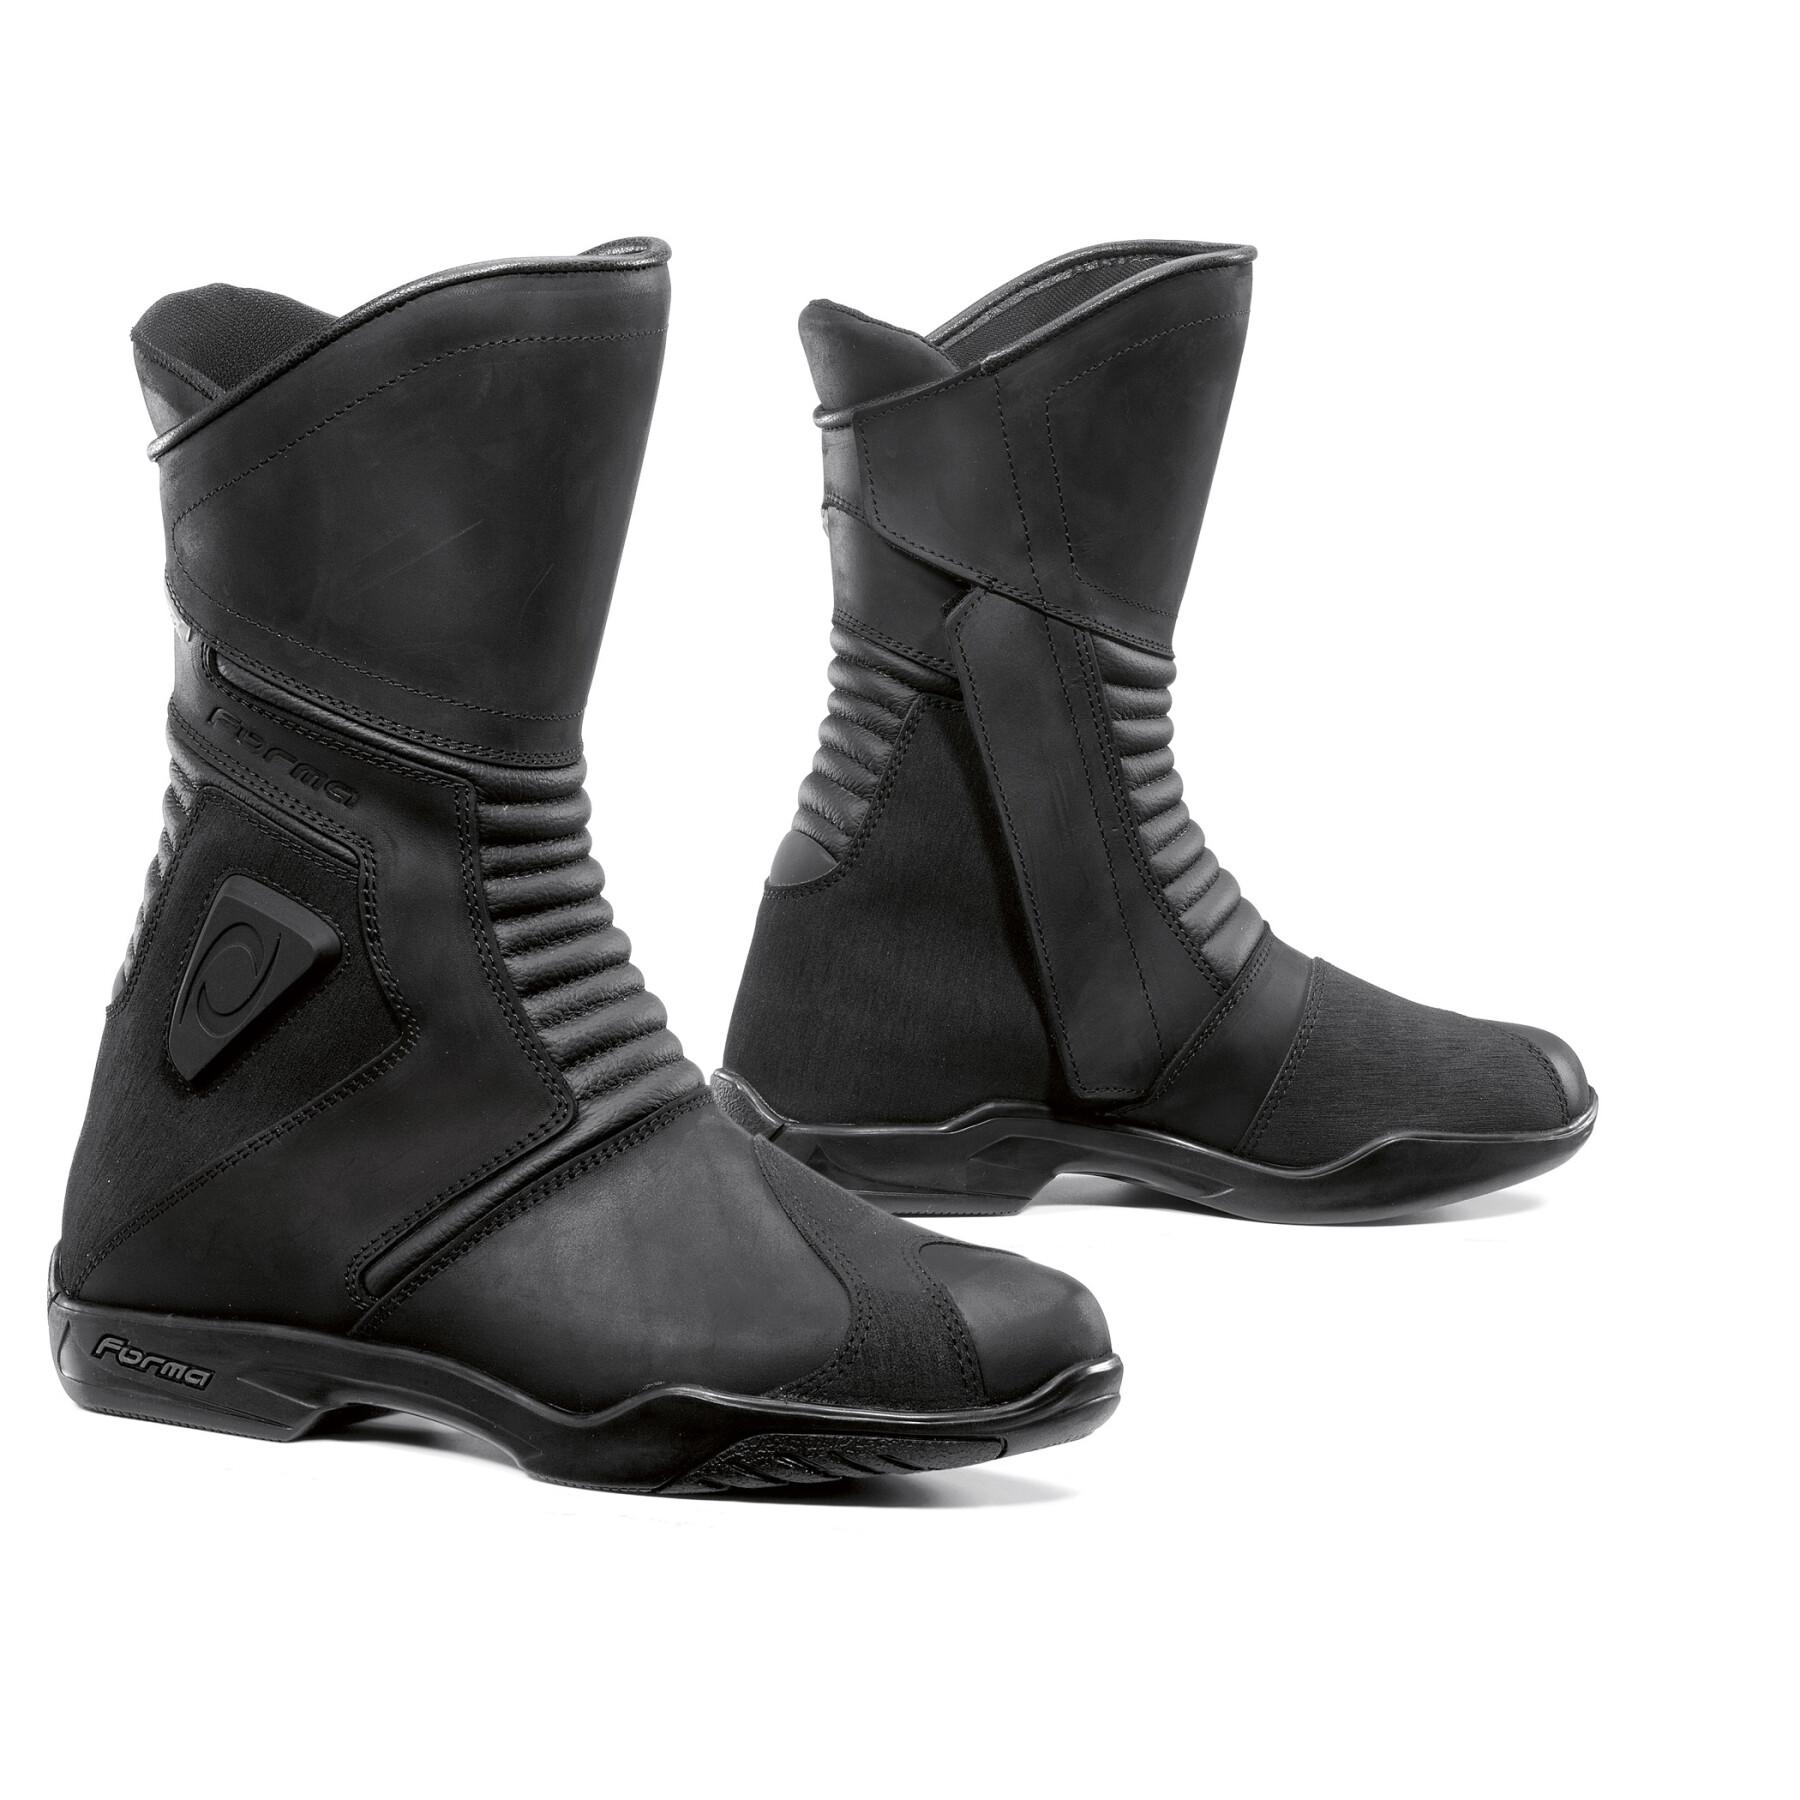 Motorcycle boots Forma Voyage Wp